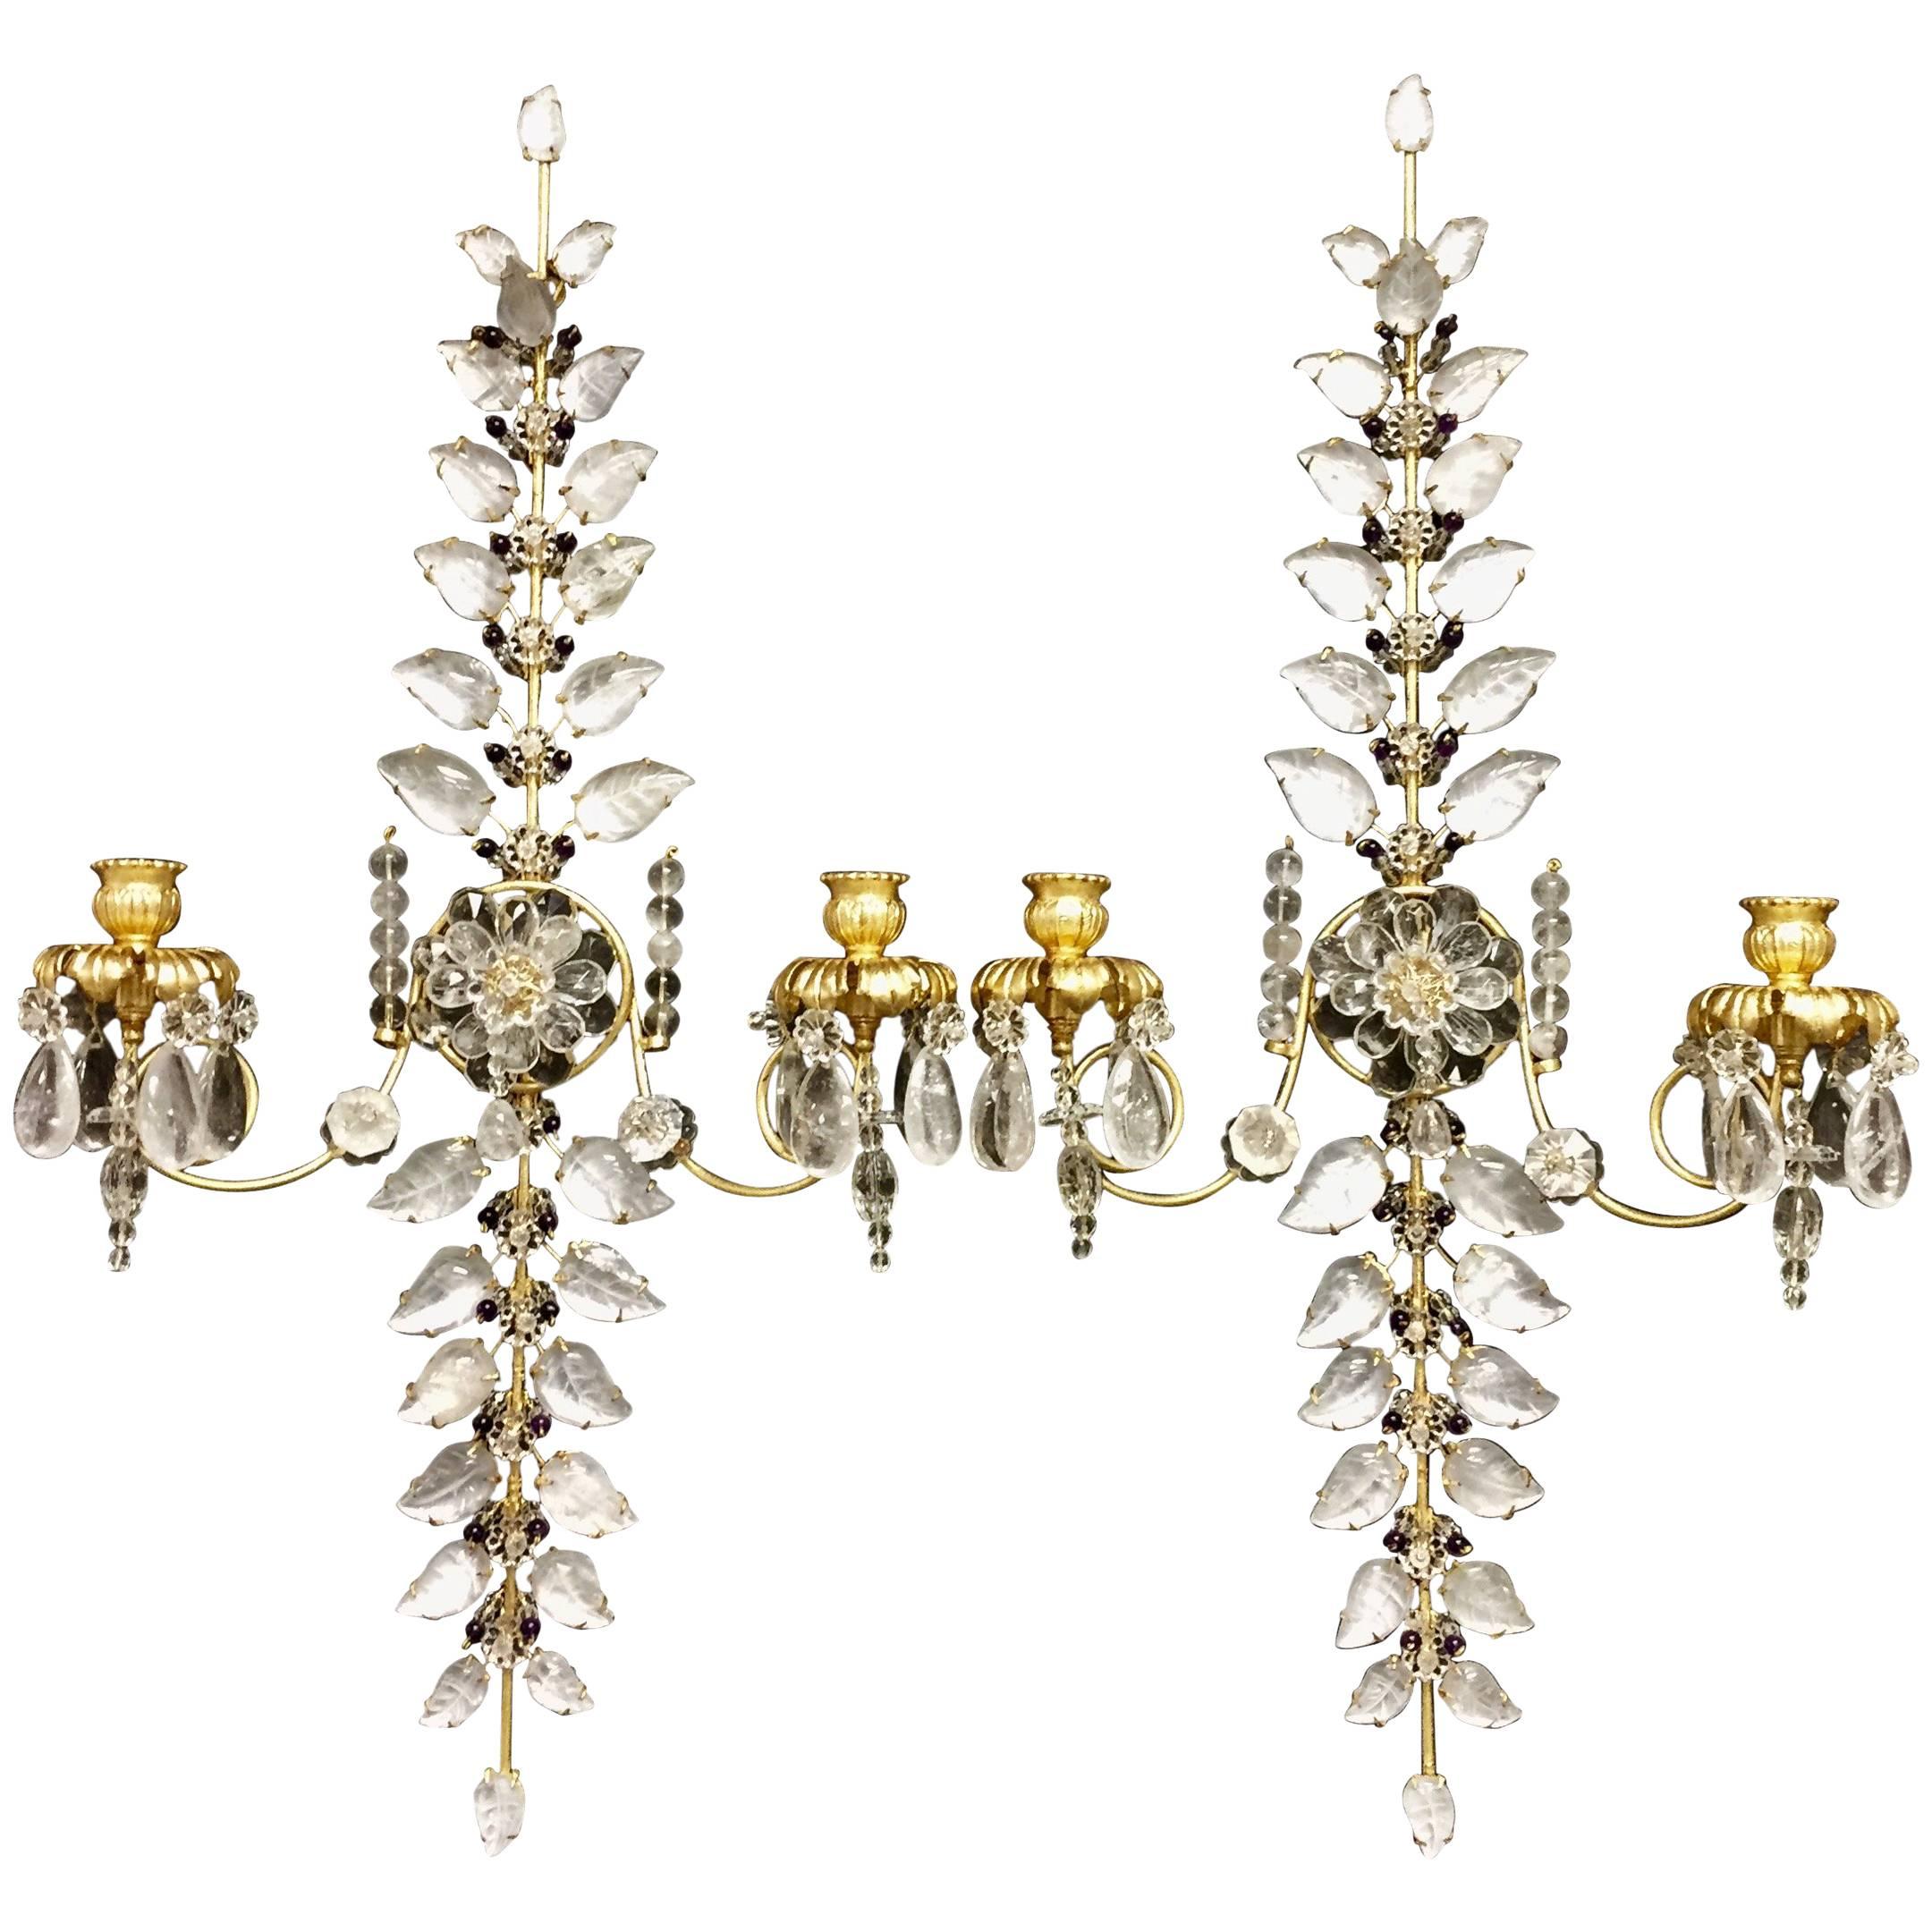 Pair of Rock Bagues Crystal Amethyst Beads Two-Arm Transitional Sconces